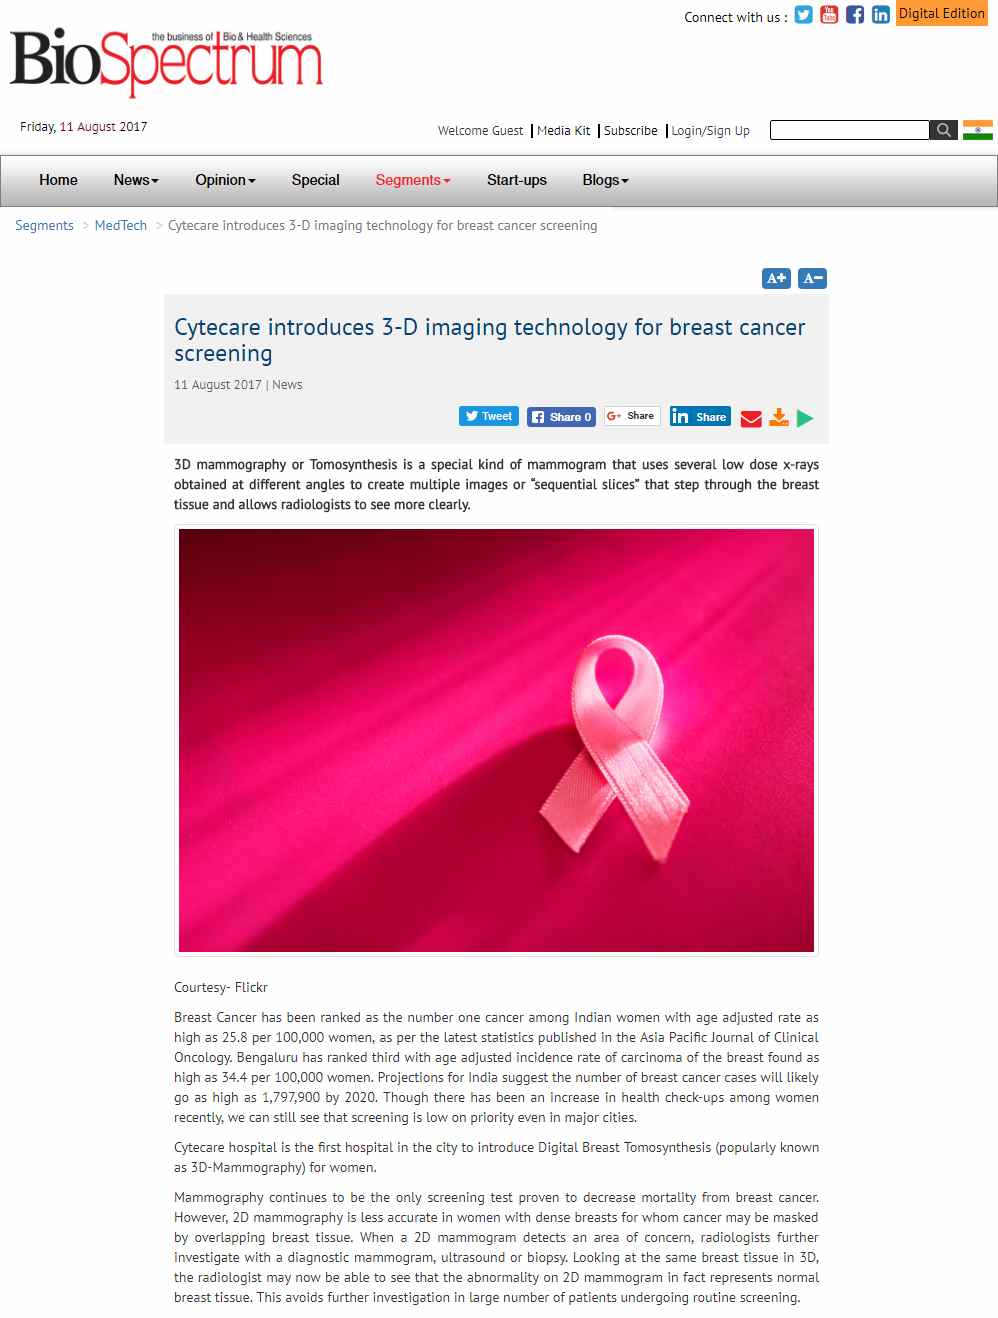 3-D Imaging Technology for Breast Cancer Screening - Cytecare